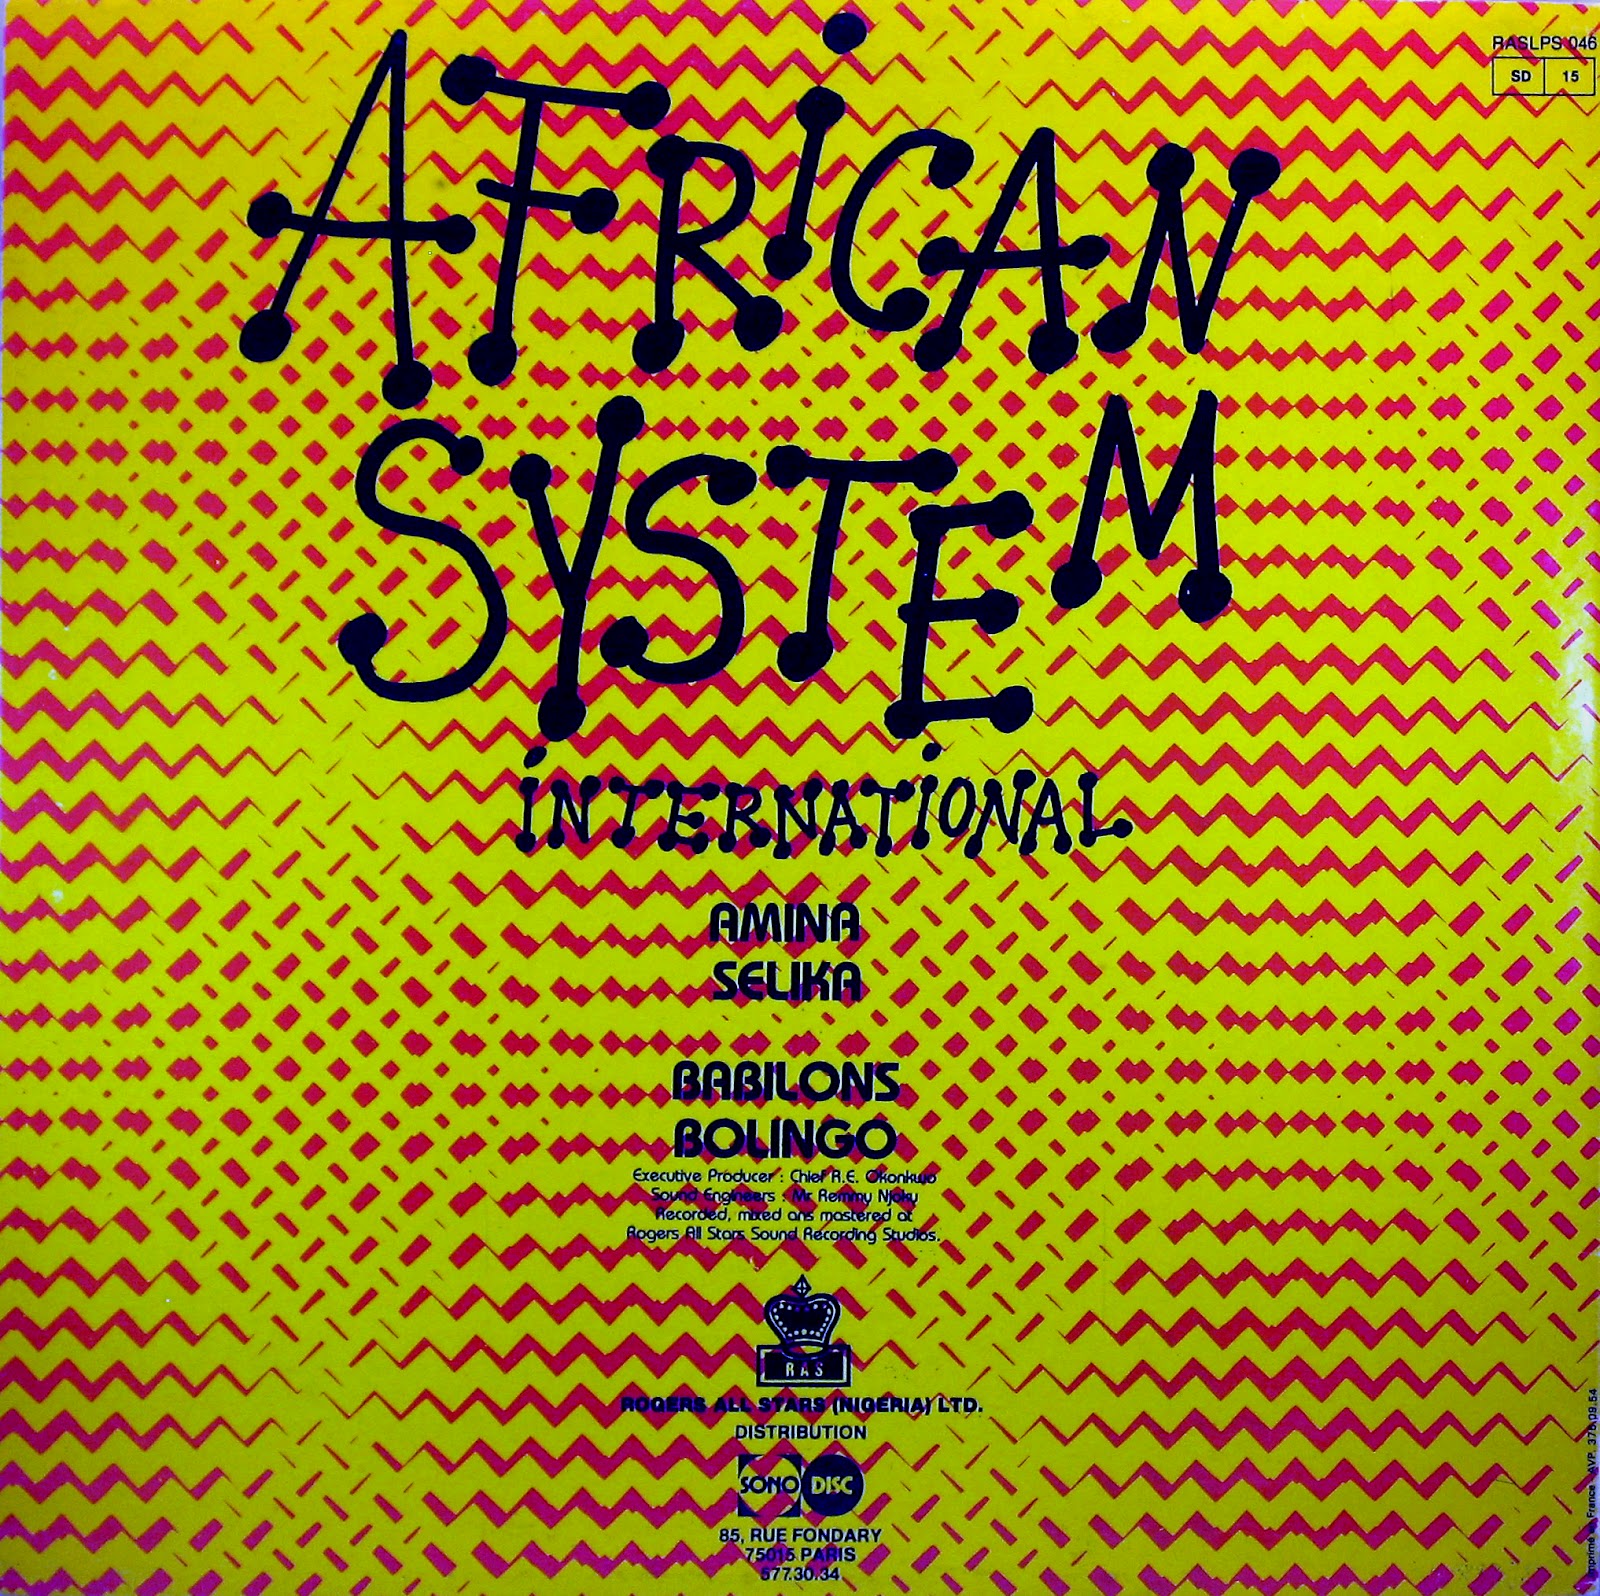  African System International : Rogers all stars (1983)  African+System+International%252C+back